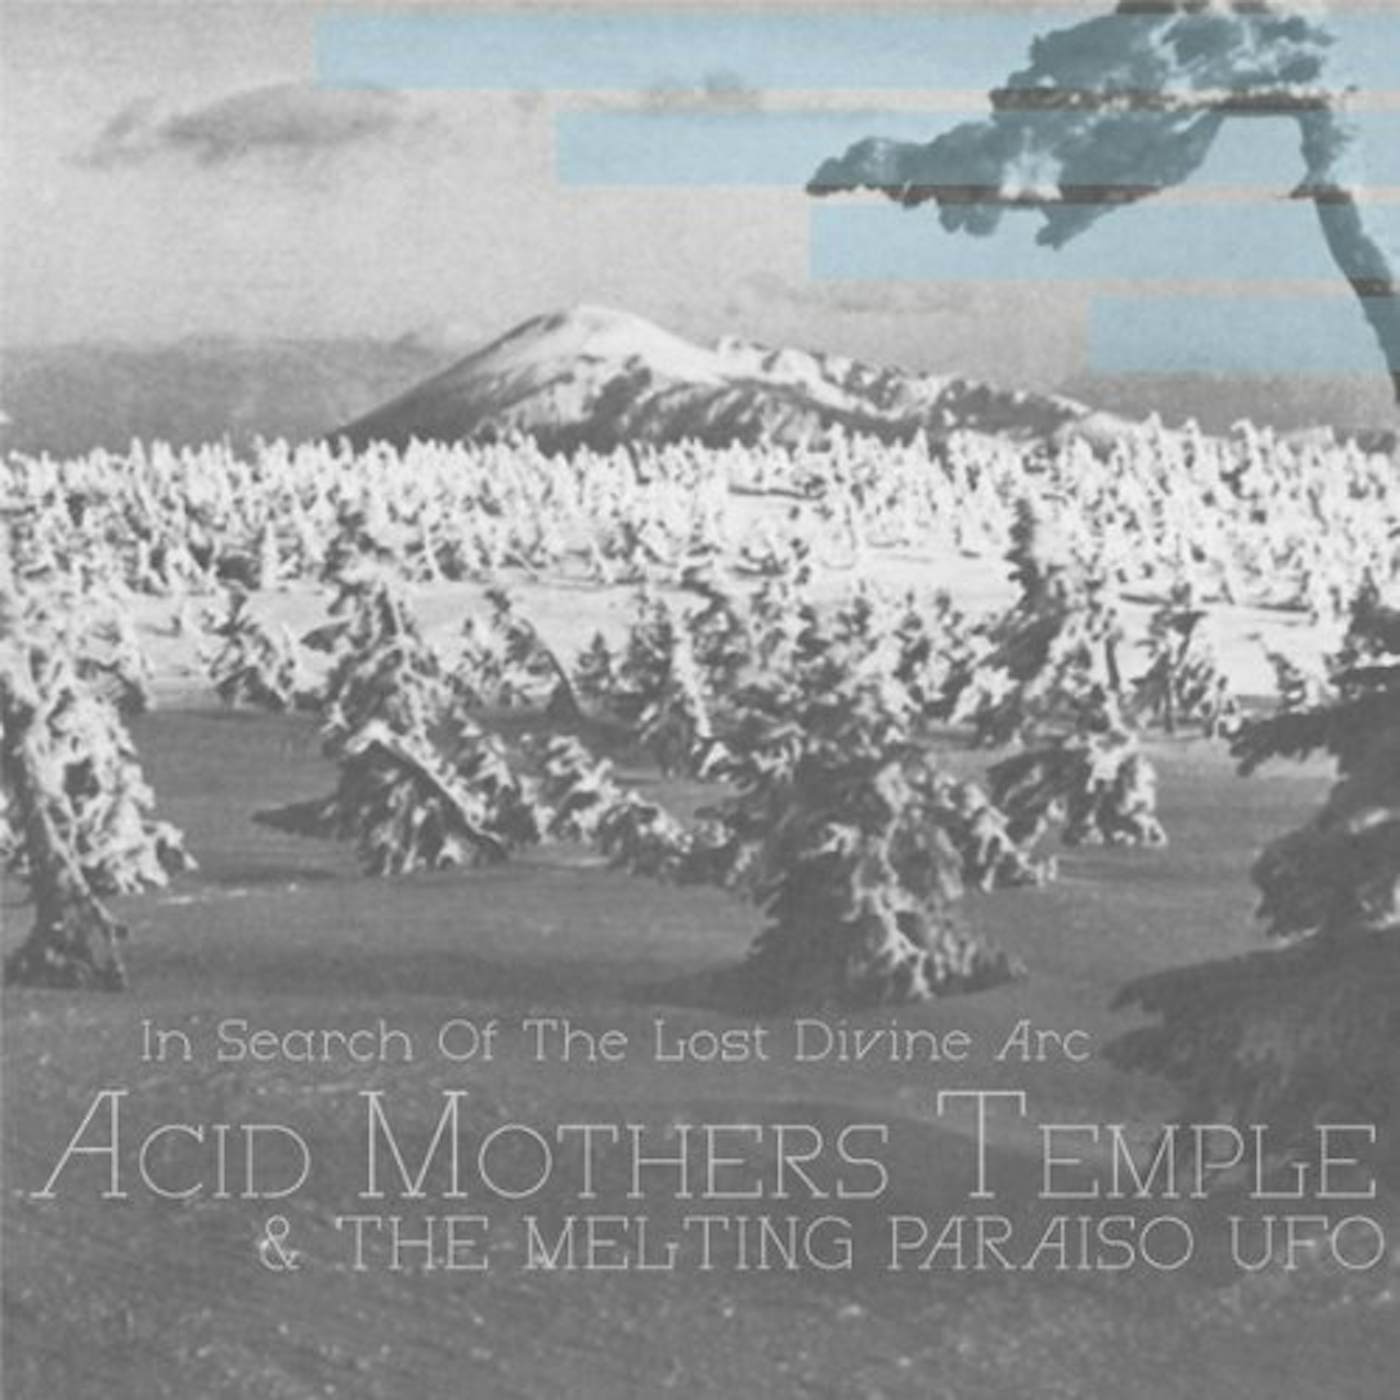 Acid Mothers Temple & Melting Paraiso U.F.O. In Search Of The Lost Divine Arc Vinyl Record